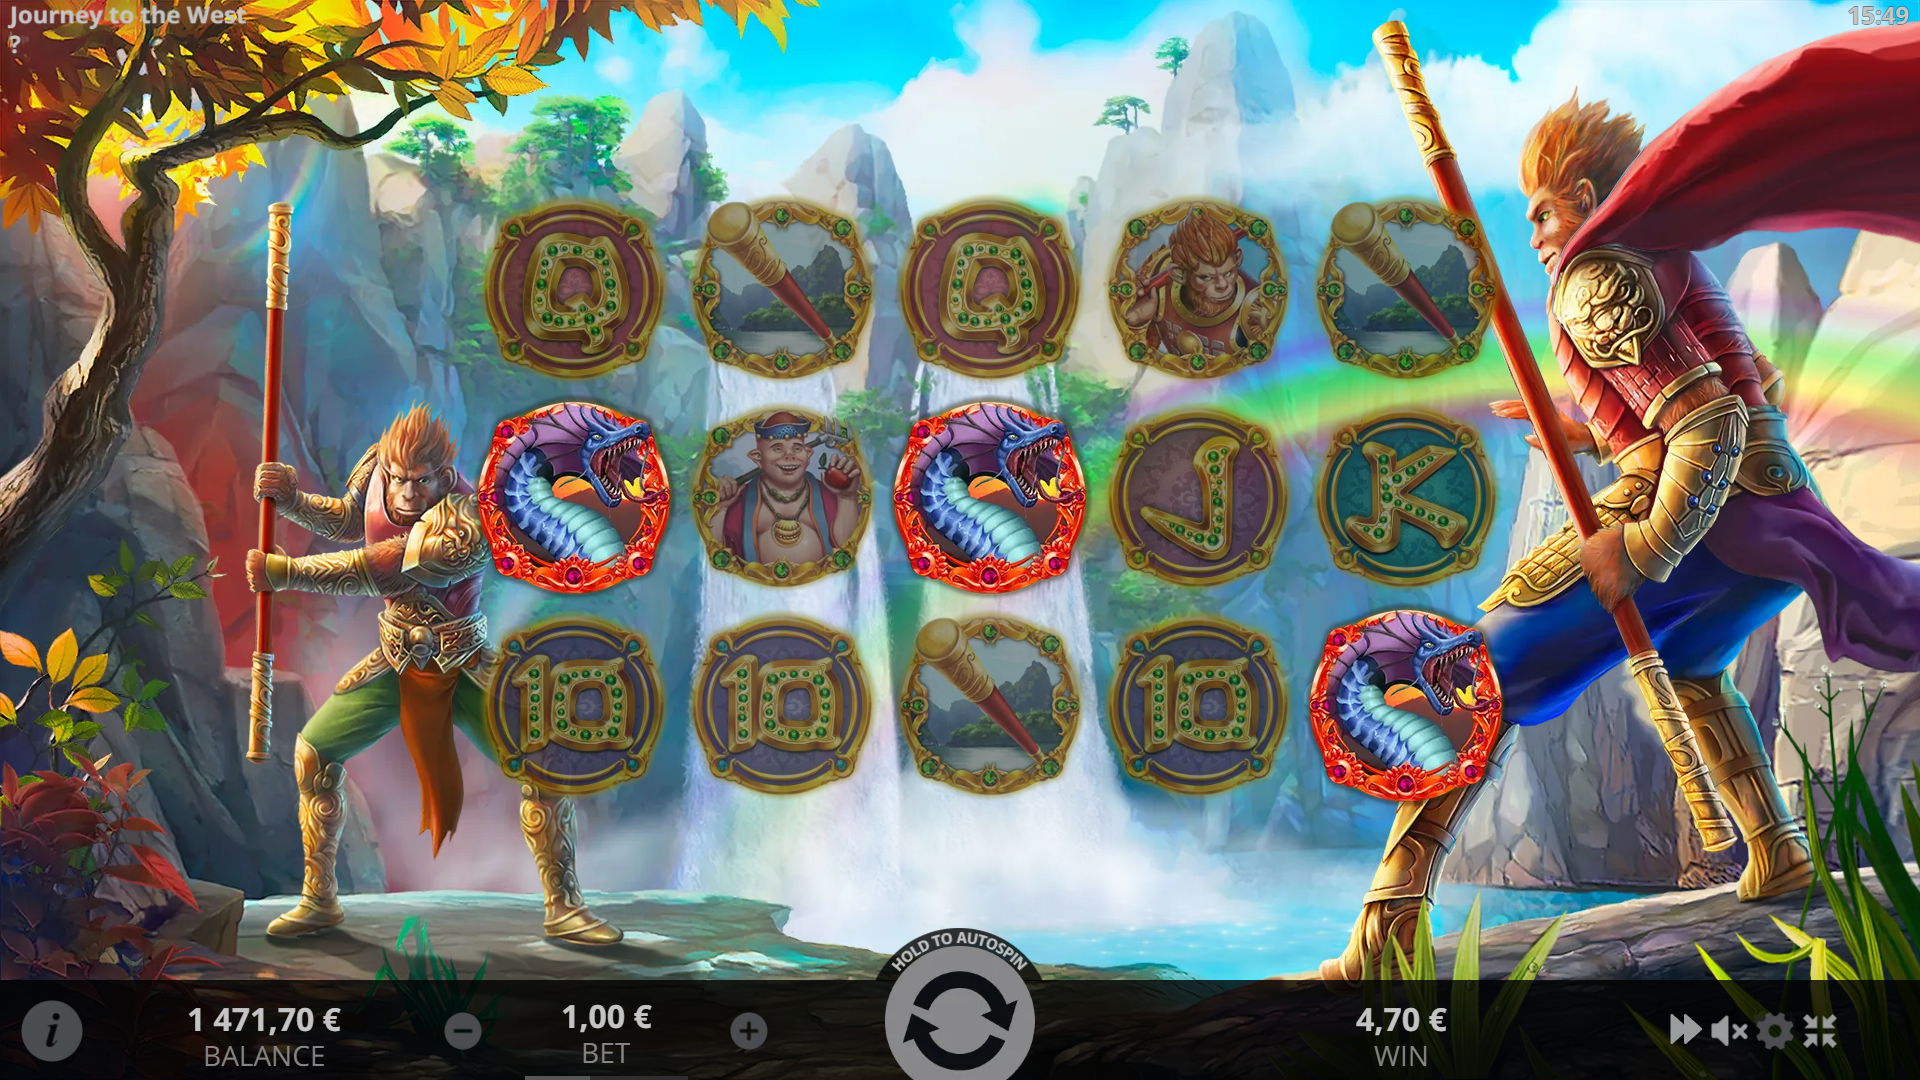 JOURNEY TO THE WEST evoplay เครดิตฟรี pgslot168 vip